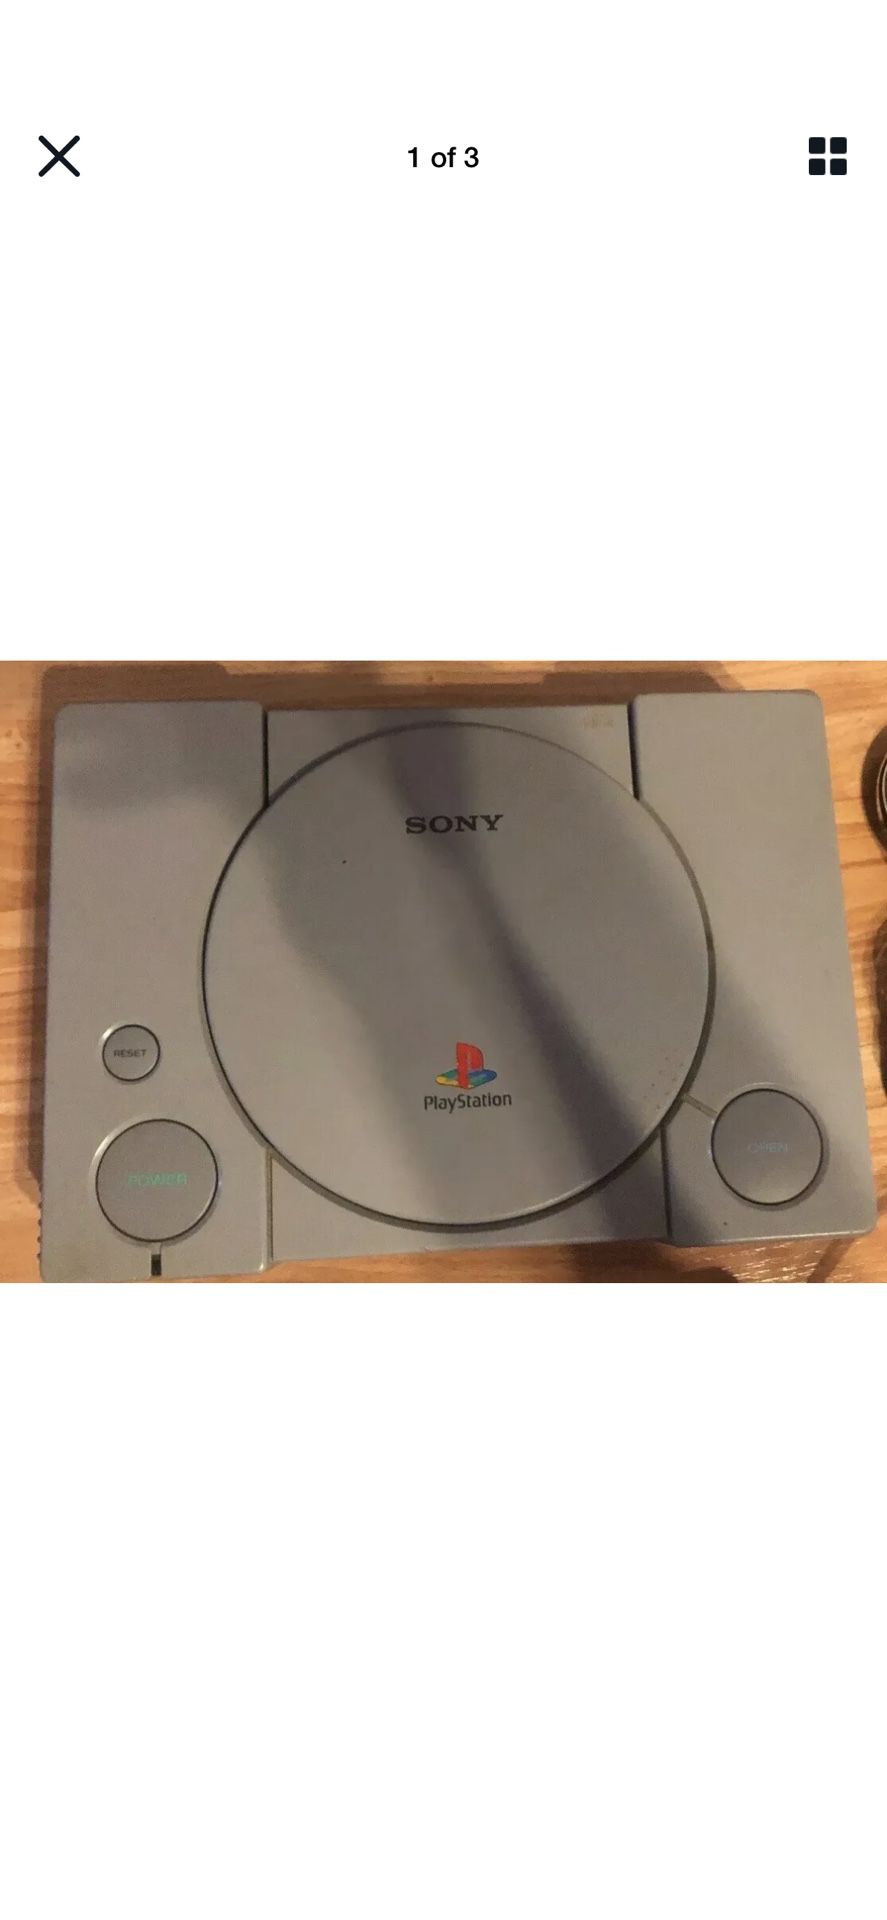 Sony PlayStation PS1 w/ 1 game